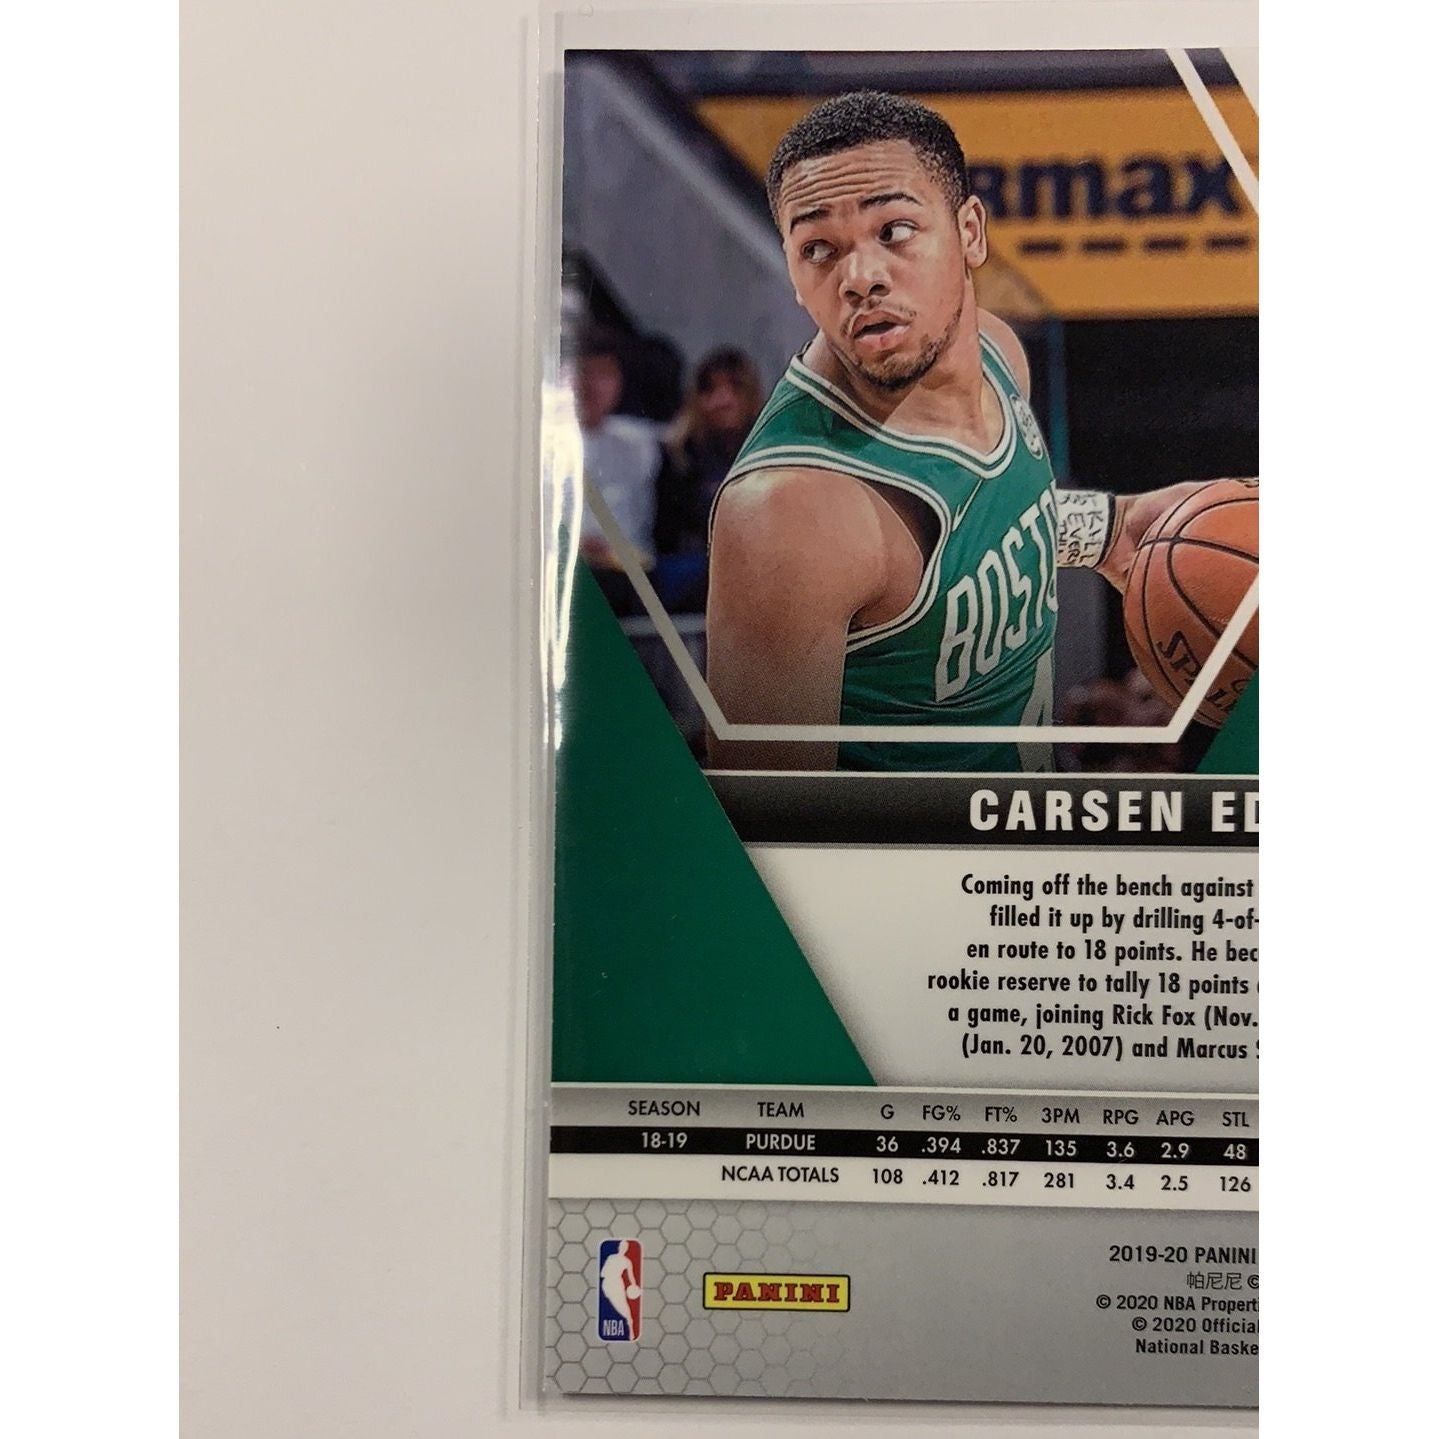  2019-20 Panini Mosaic Carsen Edwards RC  Local Legends Cards & Collectibles